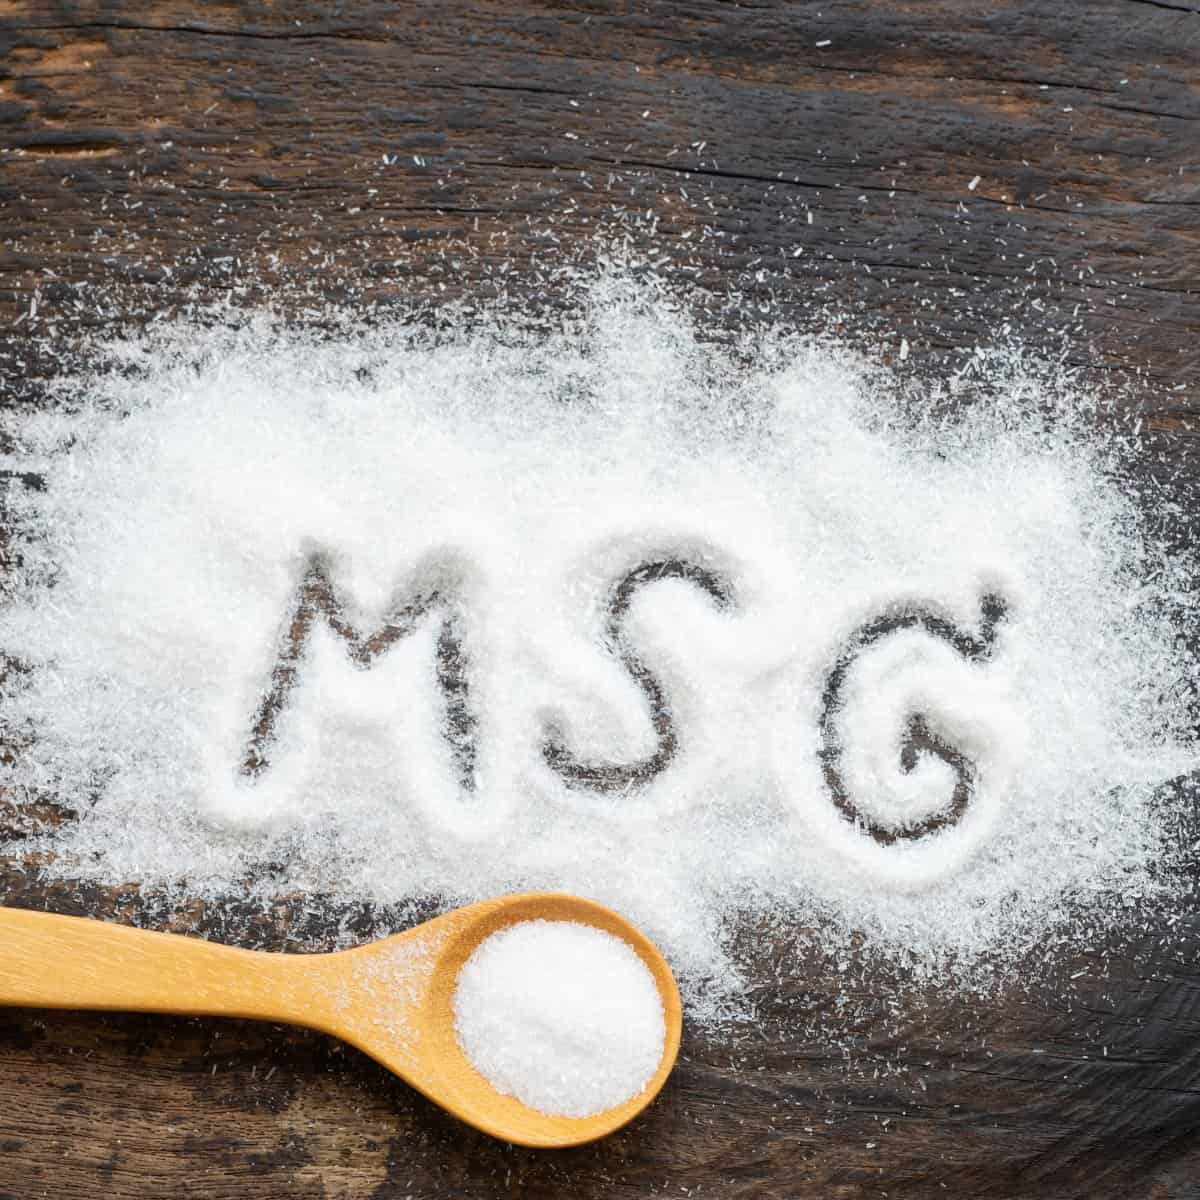 What is msg